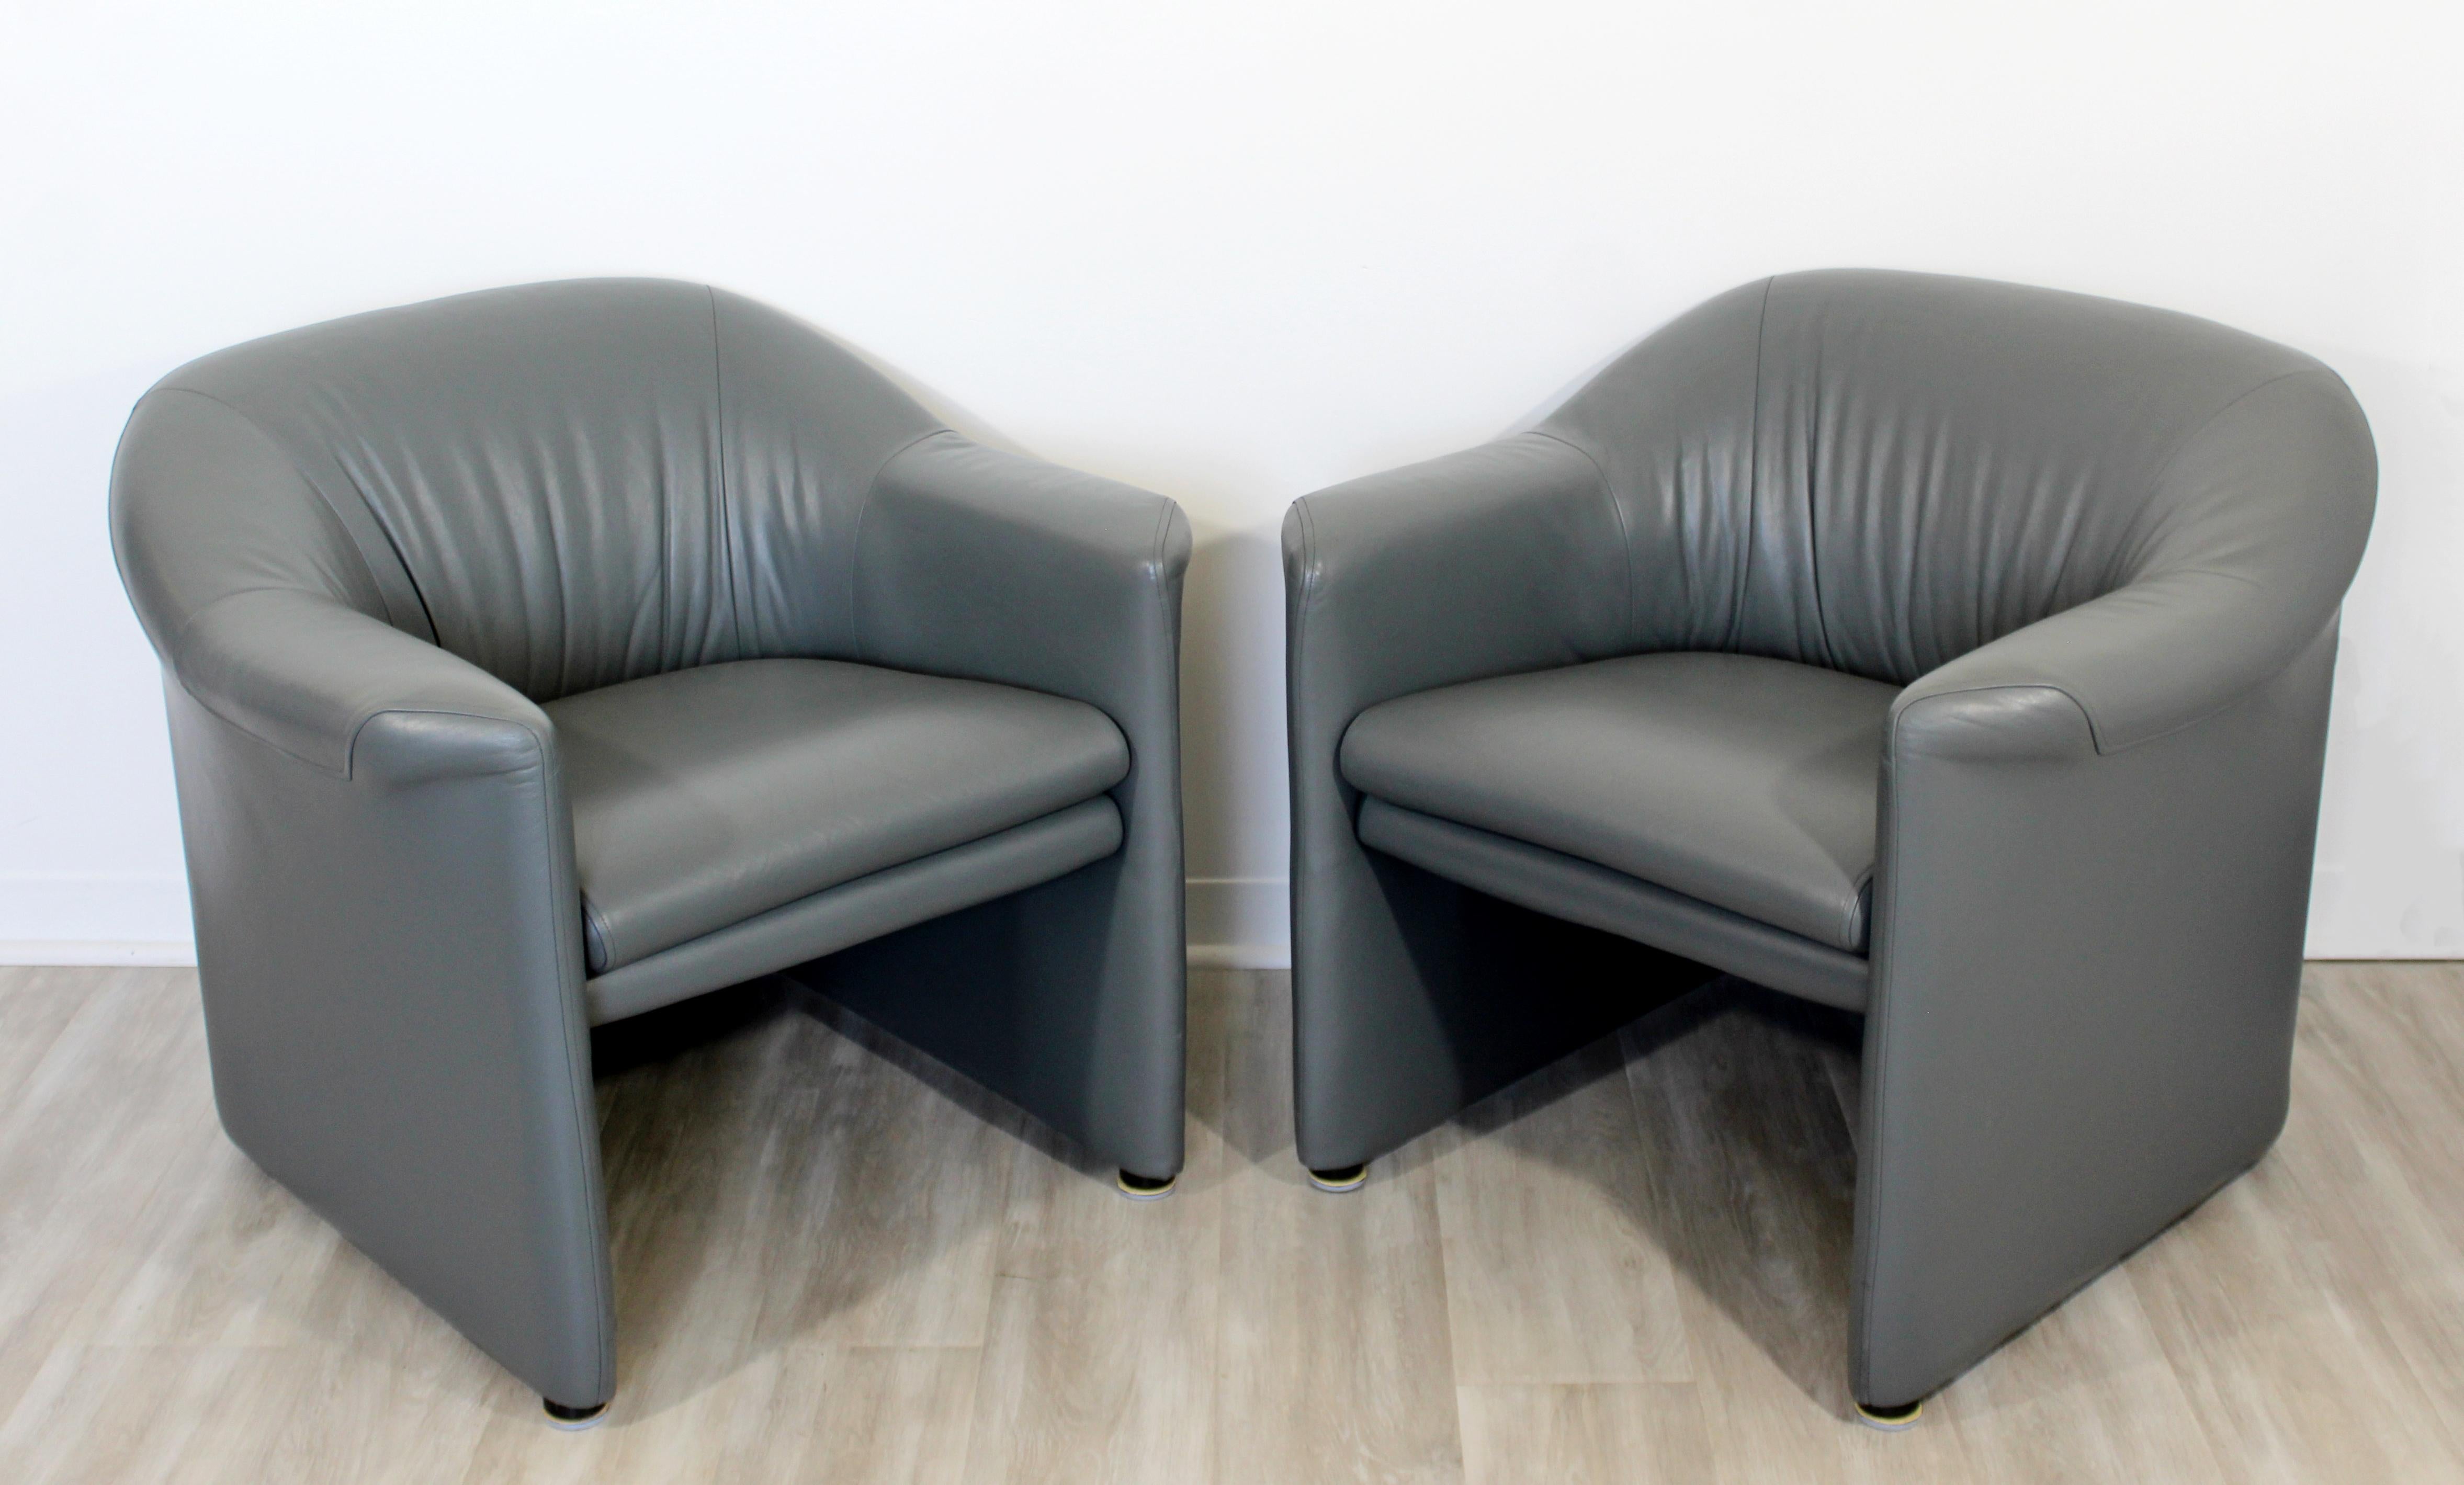 For your consideration is a gorgeous pair of gray leather lounge chairs, Brayton for Metropolitan Furniture Company, circa 1990s. In excellent condition. The dimensions are 31